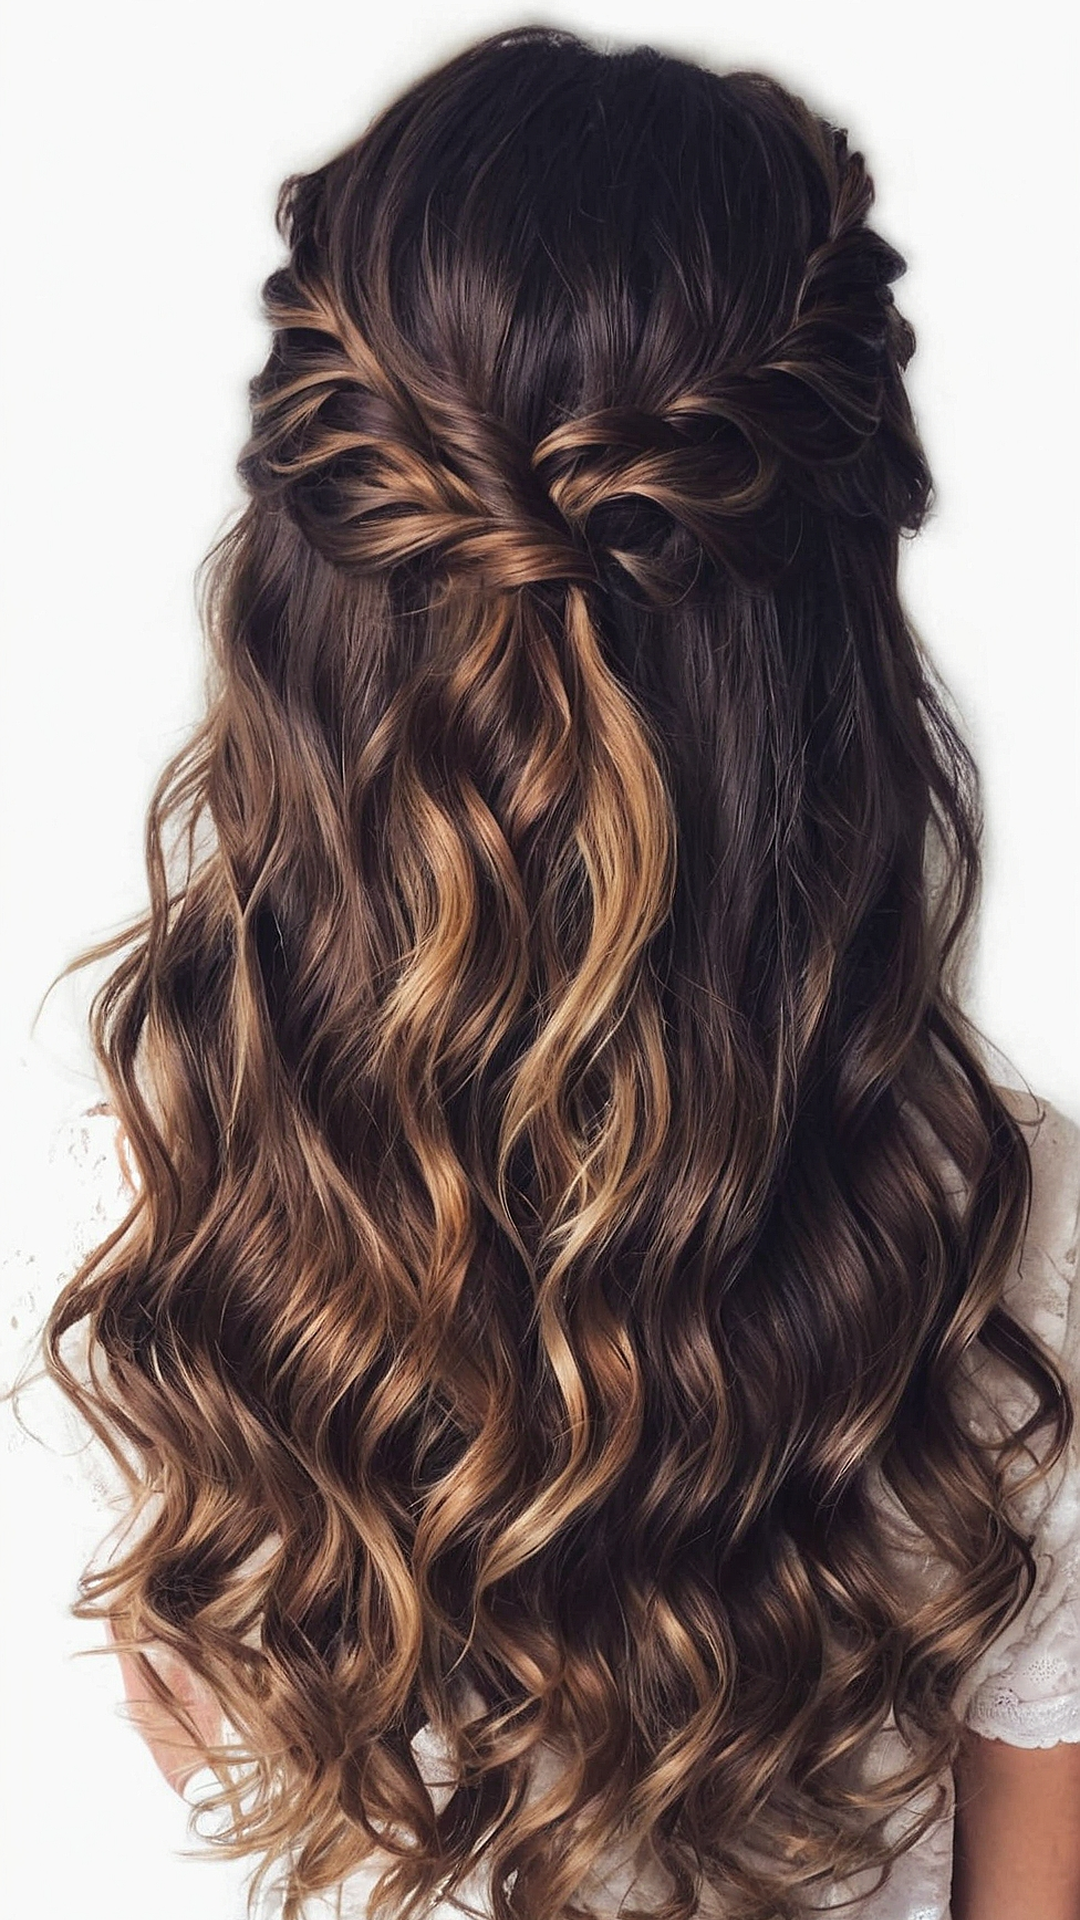 Waves of Beauty: Dazzling Hairstyle Ideas